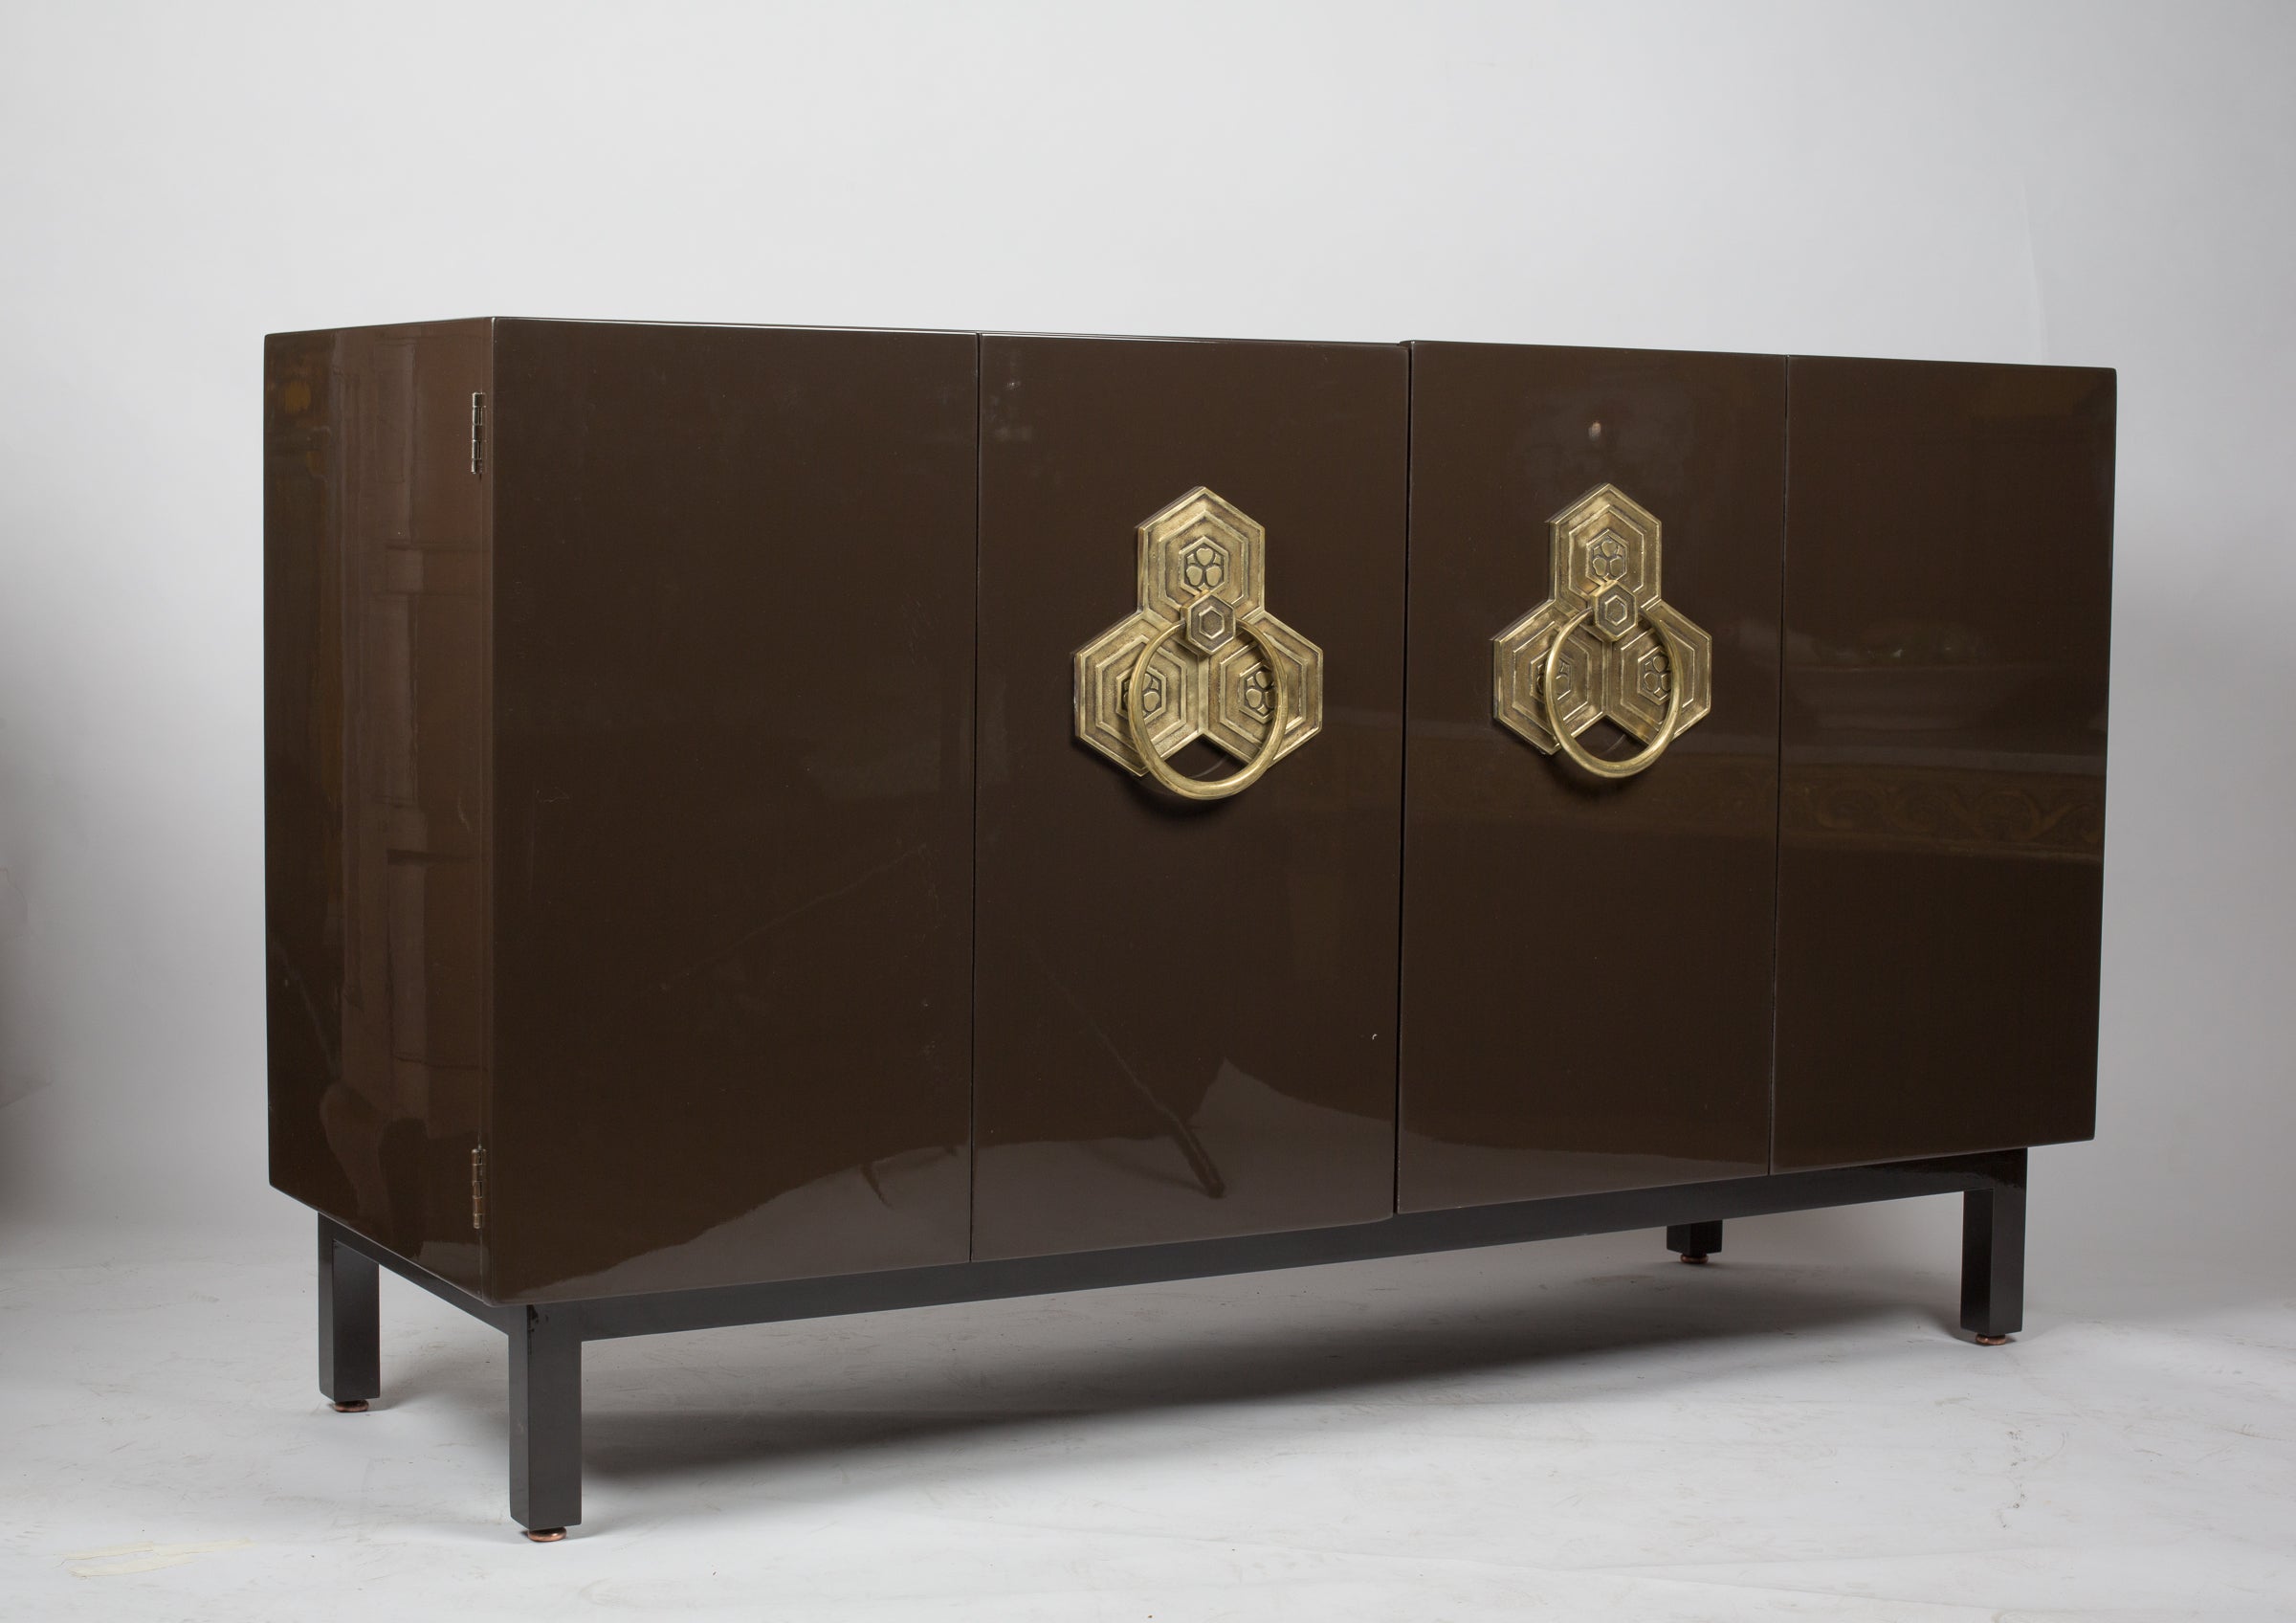 Signed John Widdicomb Lacquered Cabinet